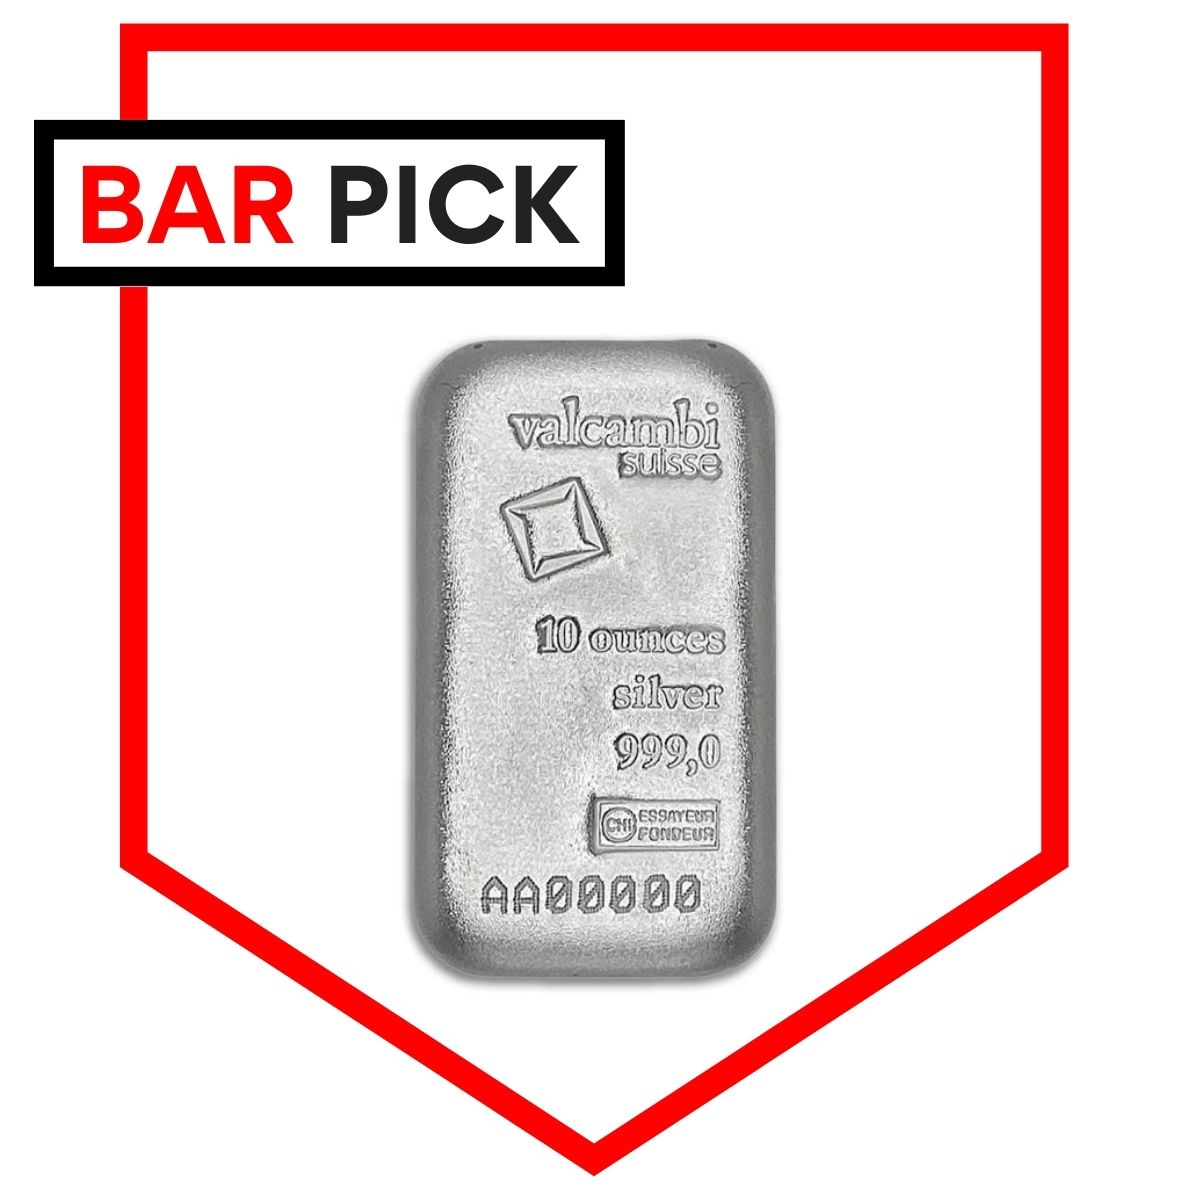 Valcambi Suisse 10 Ounce Silver Bar